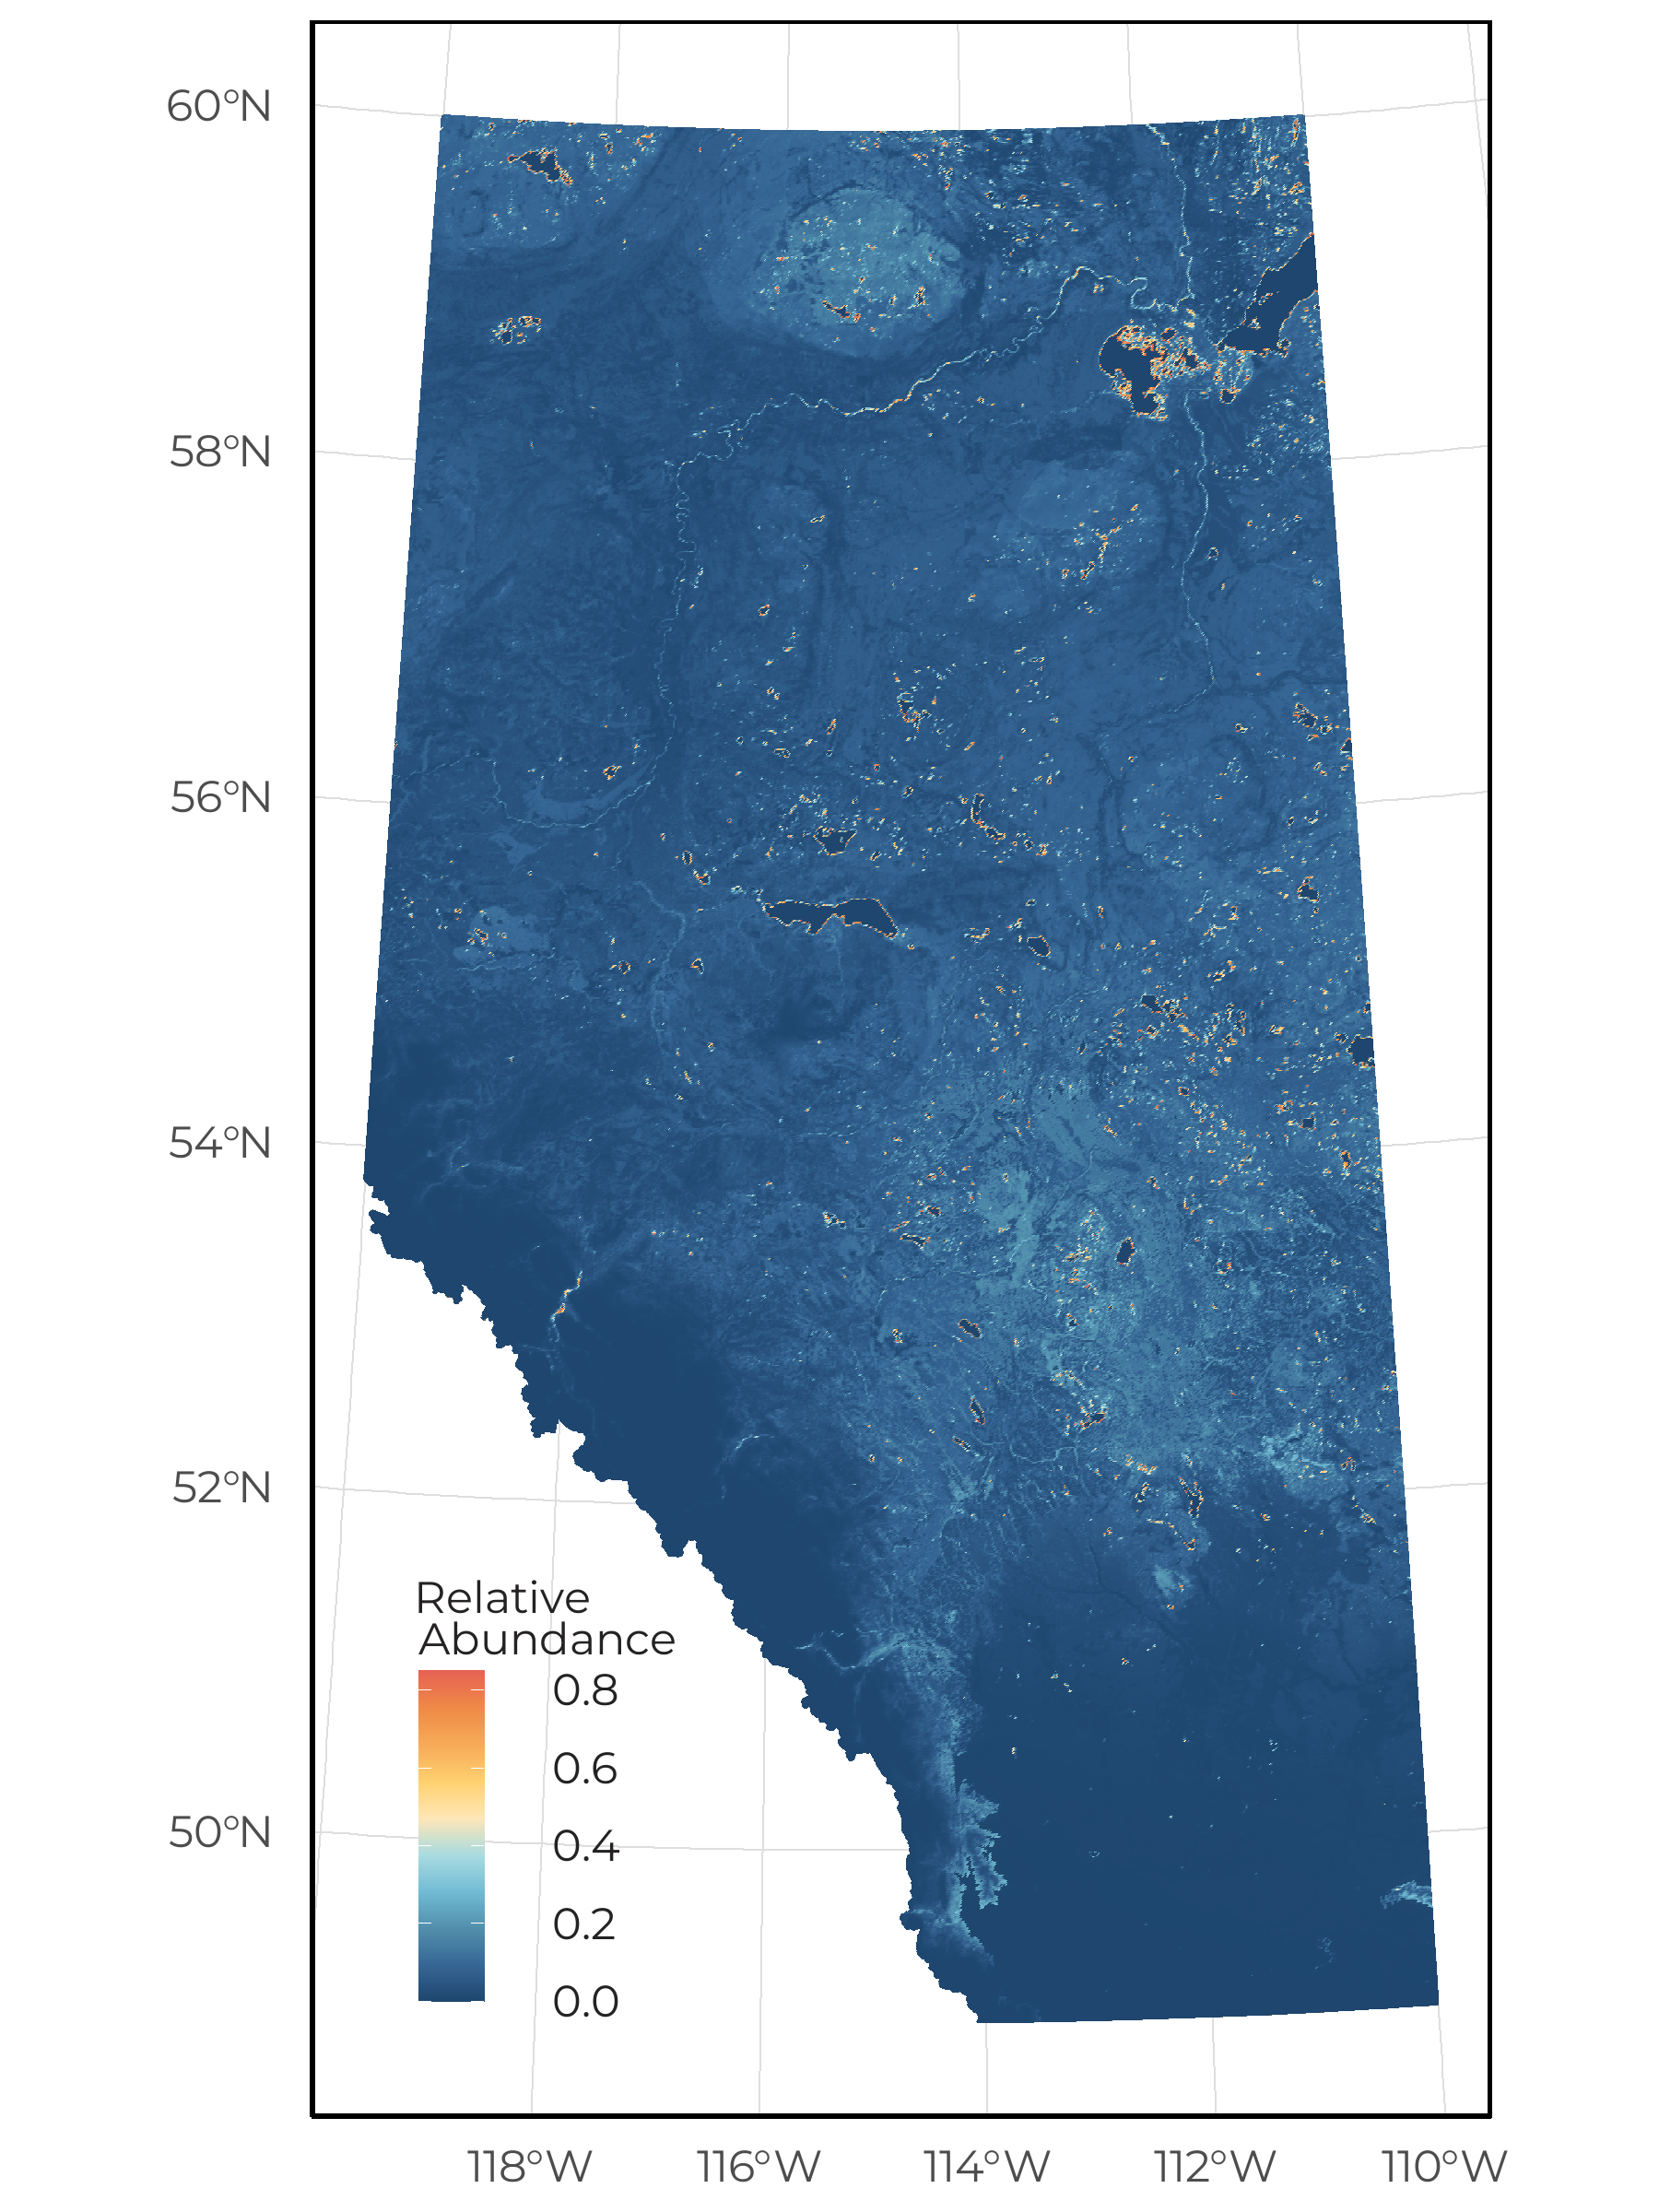 The predicted relative abundance of Wood Frog as a function of vegetation, soil, human footprint, and space/climate across Alberta under reference conditions.